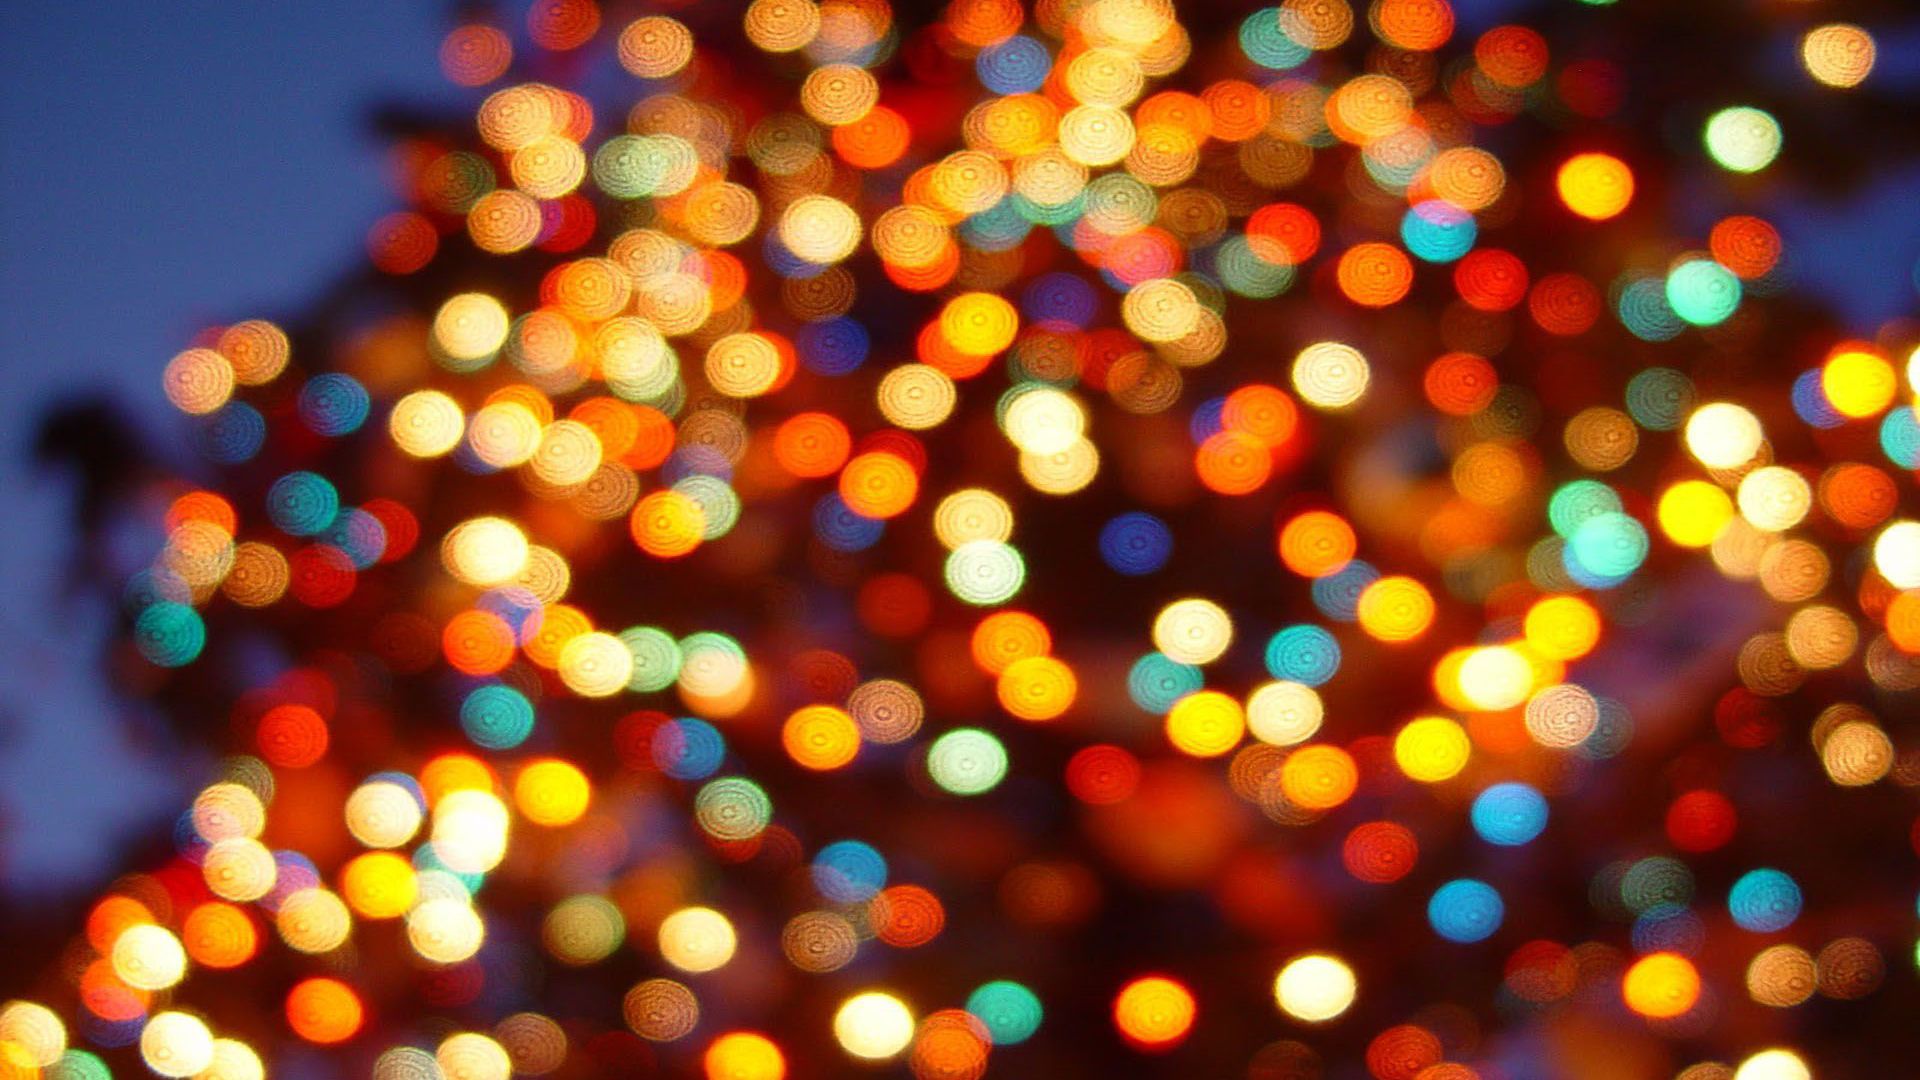 A blurry image of a Christmas tree with lights on it - Christmas lights